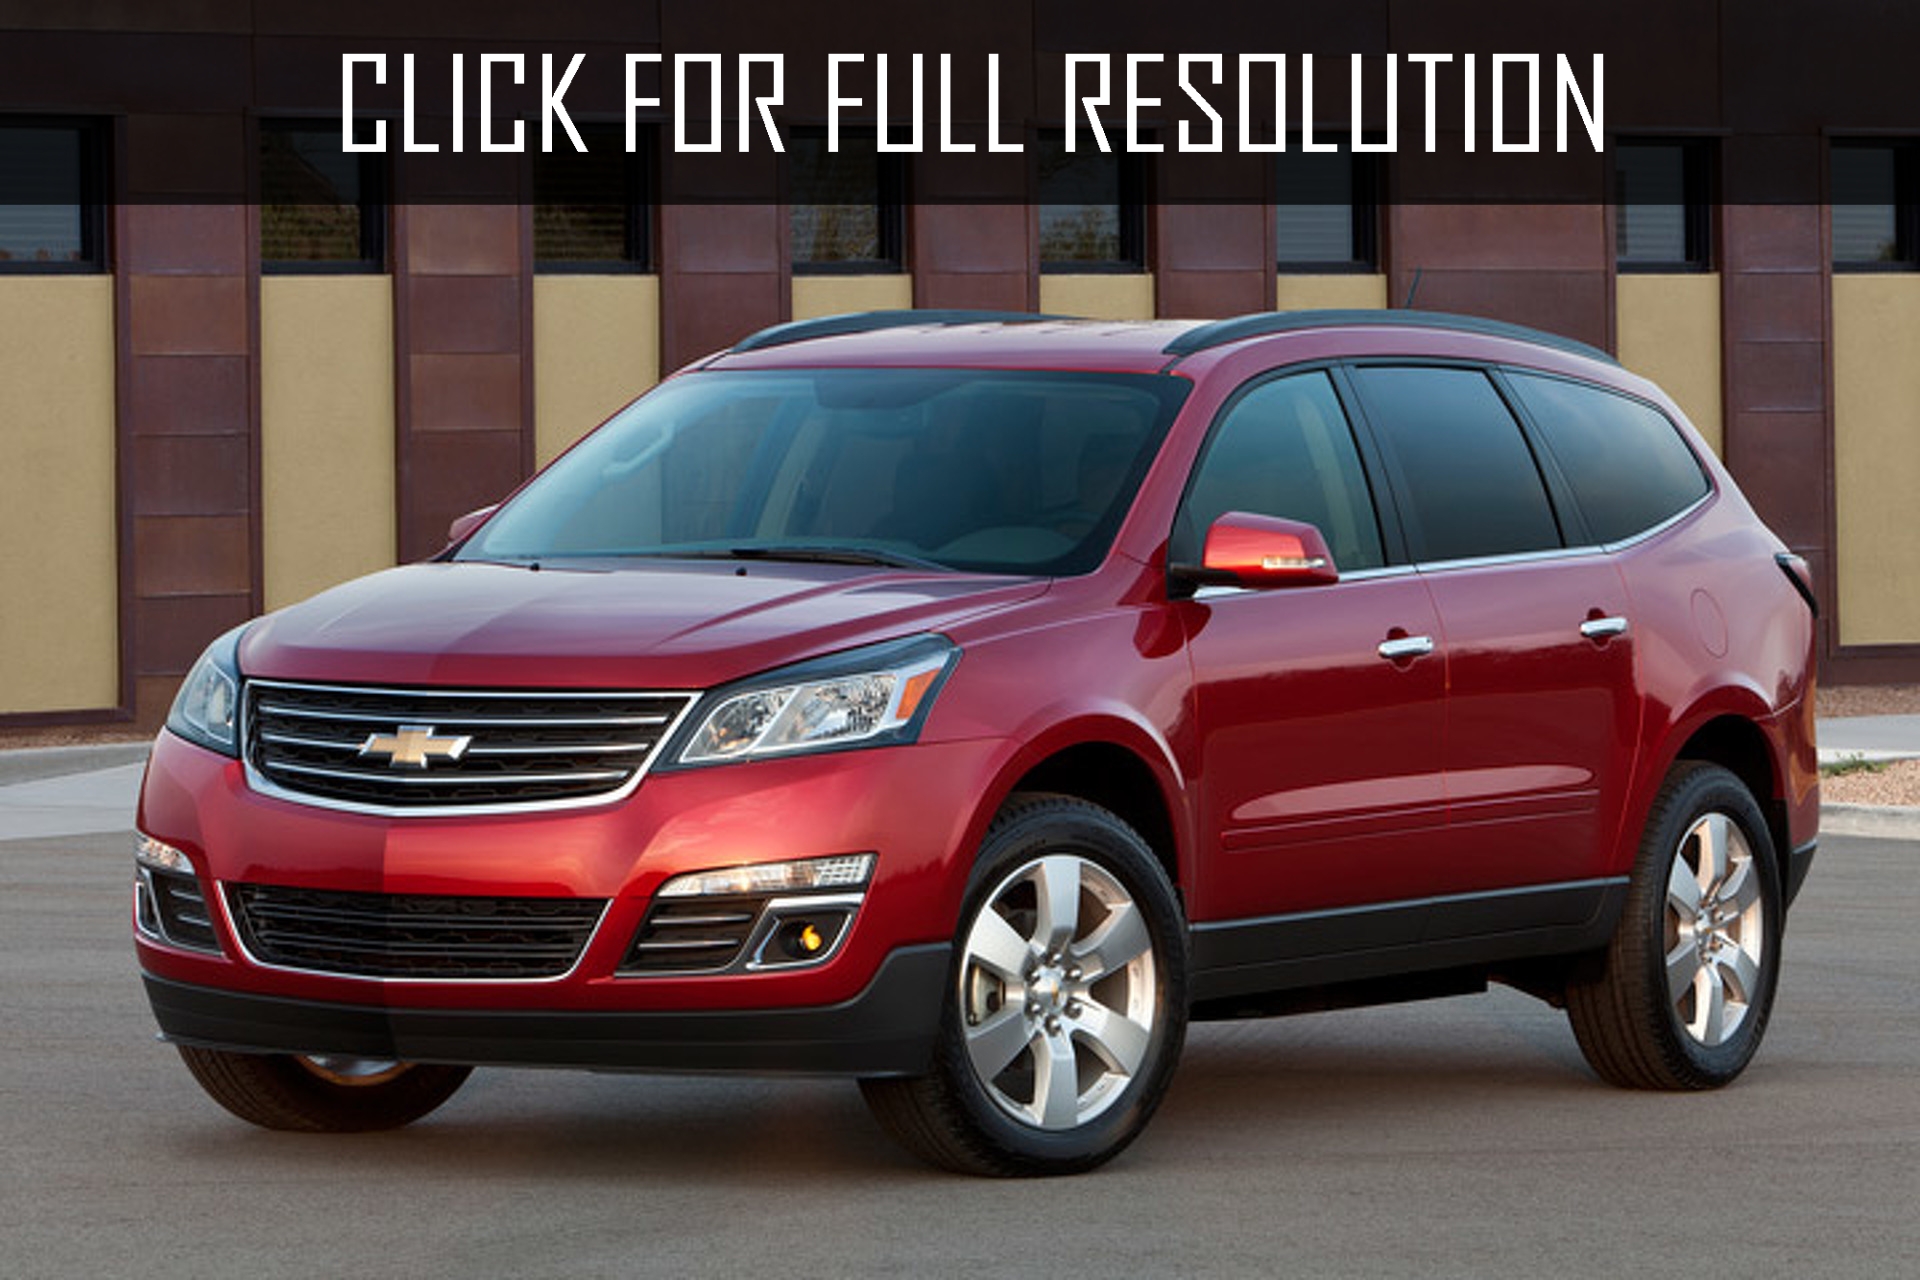 Chevrolet Suv Crossover Amazing Photo Gallery Some Information And